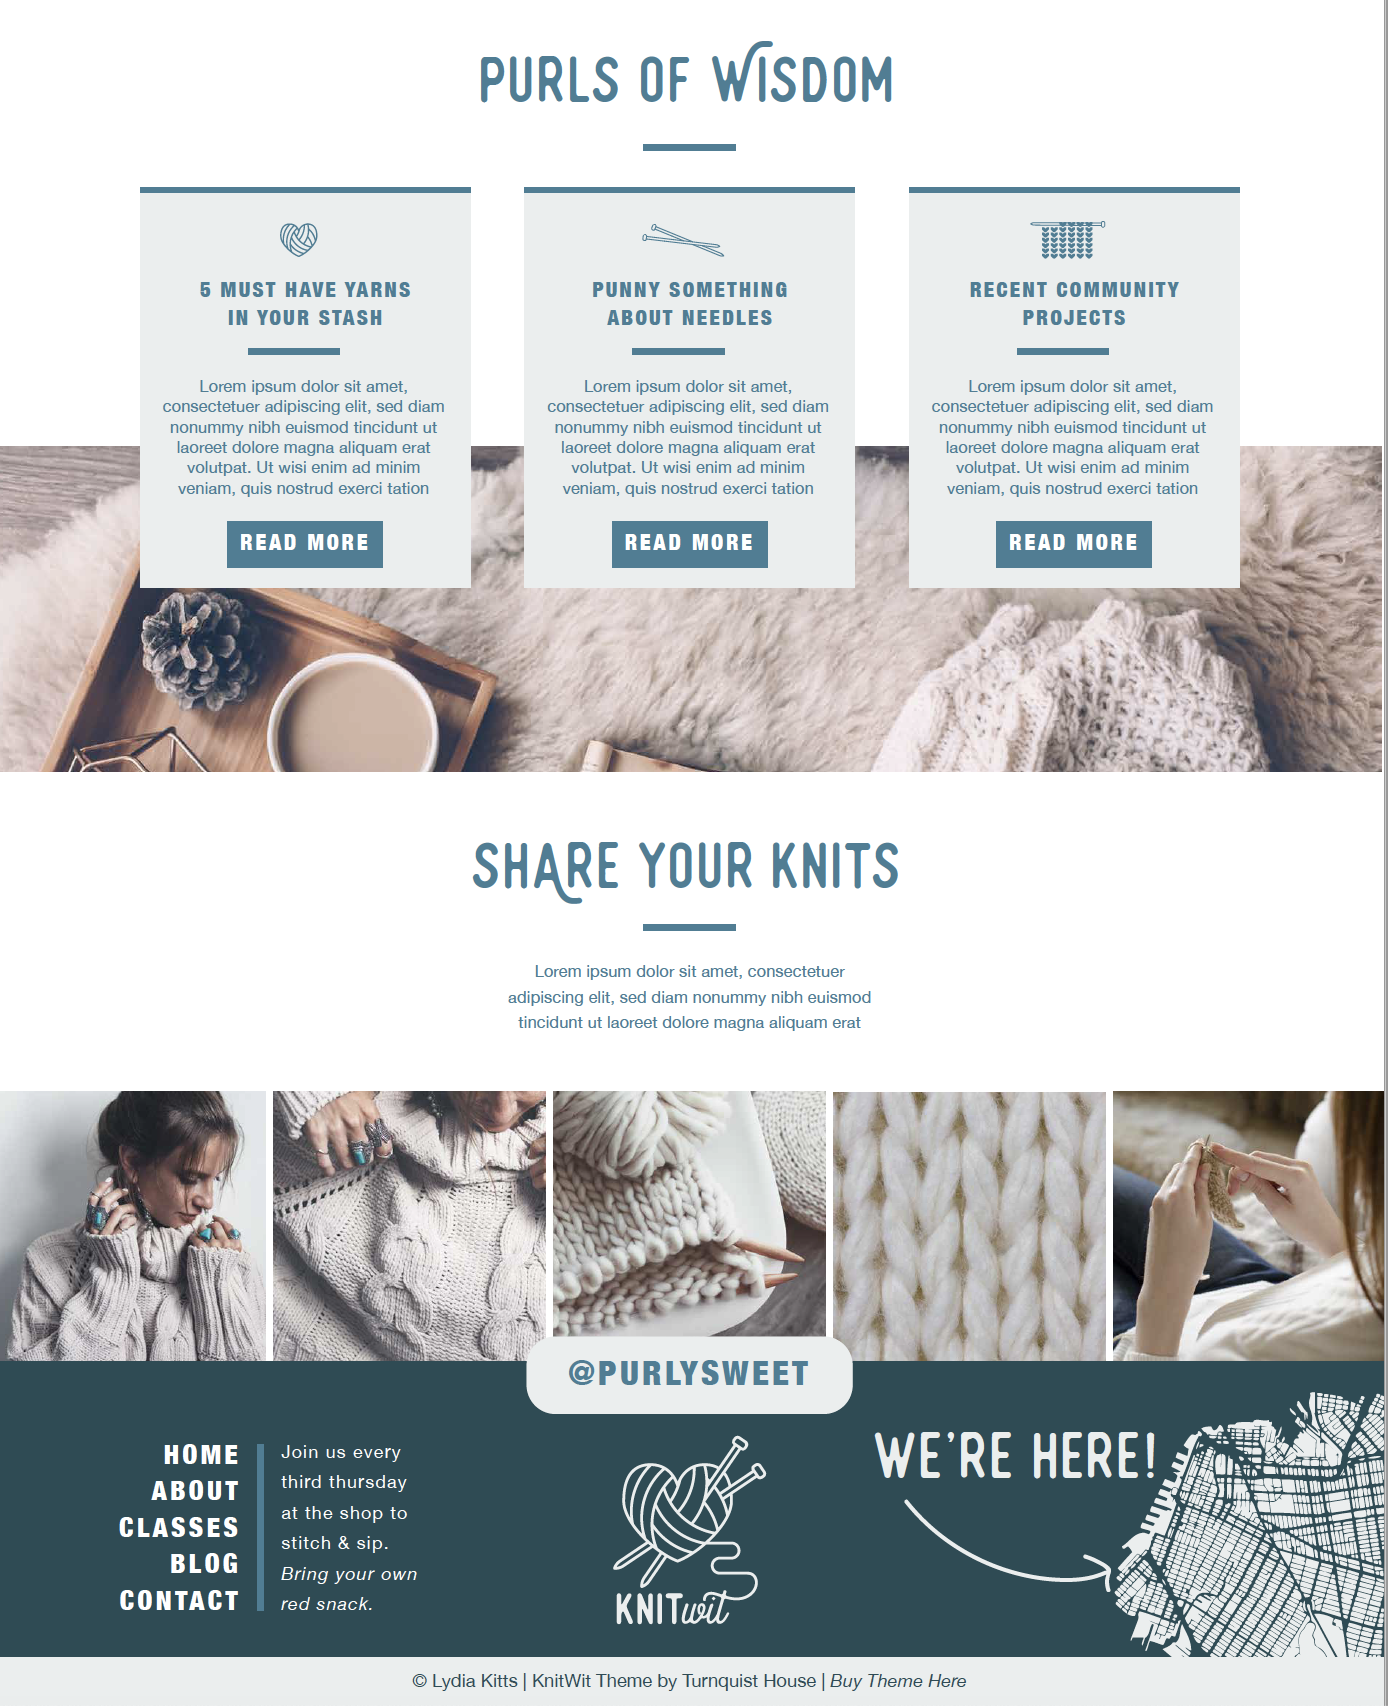 Screenshot of the website "Knit Wit"